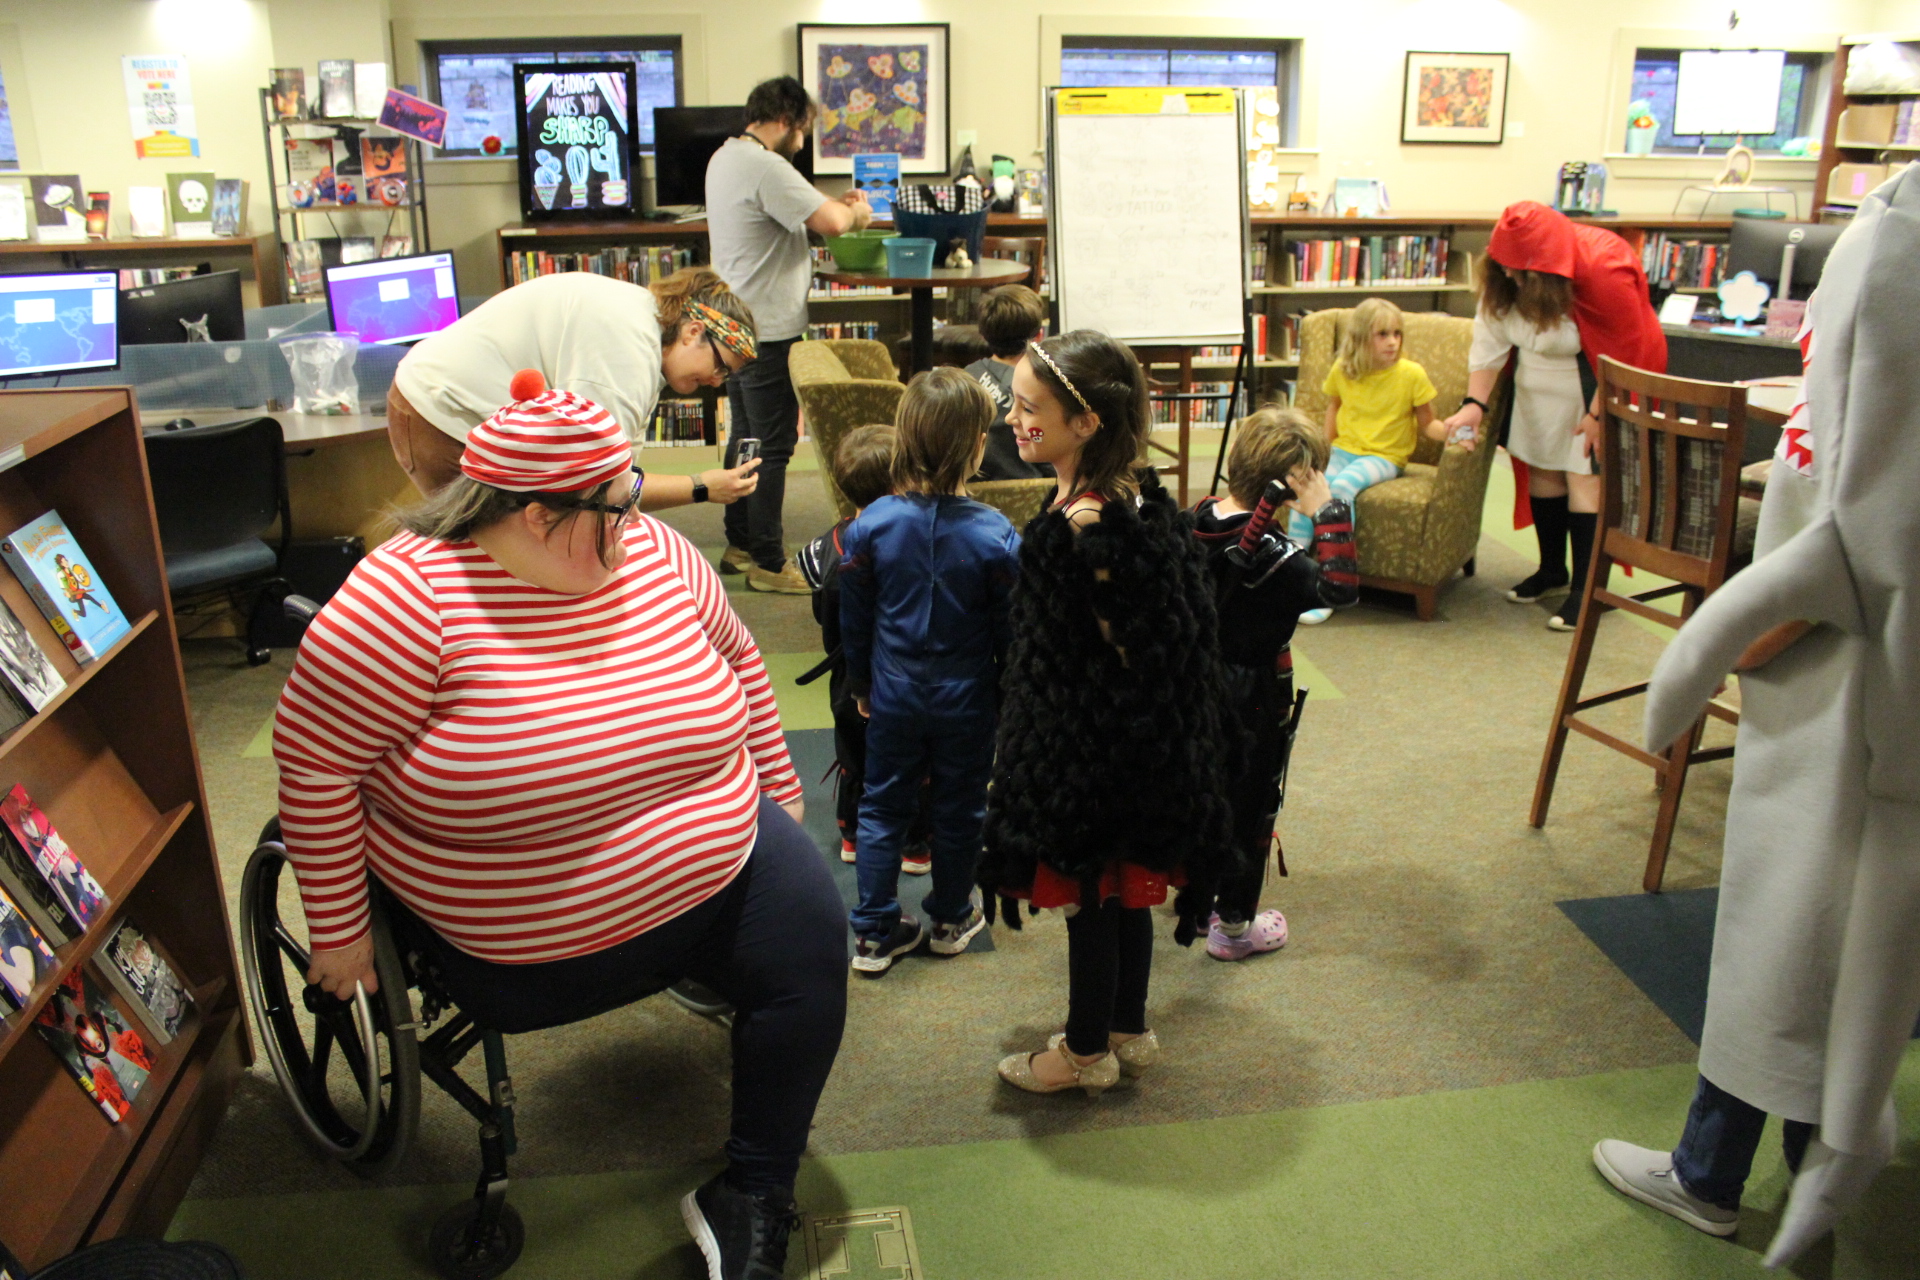 Costumed children in library children's area with patron in wheelchair dressed as Waldo in foreground